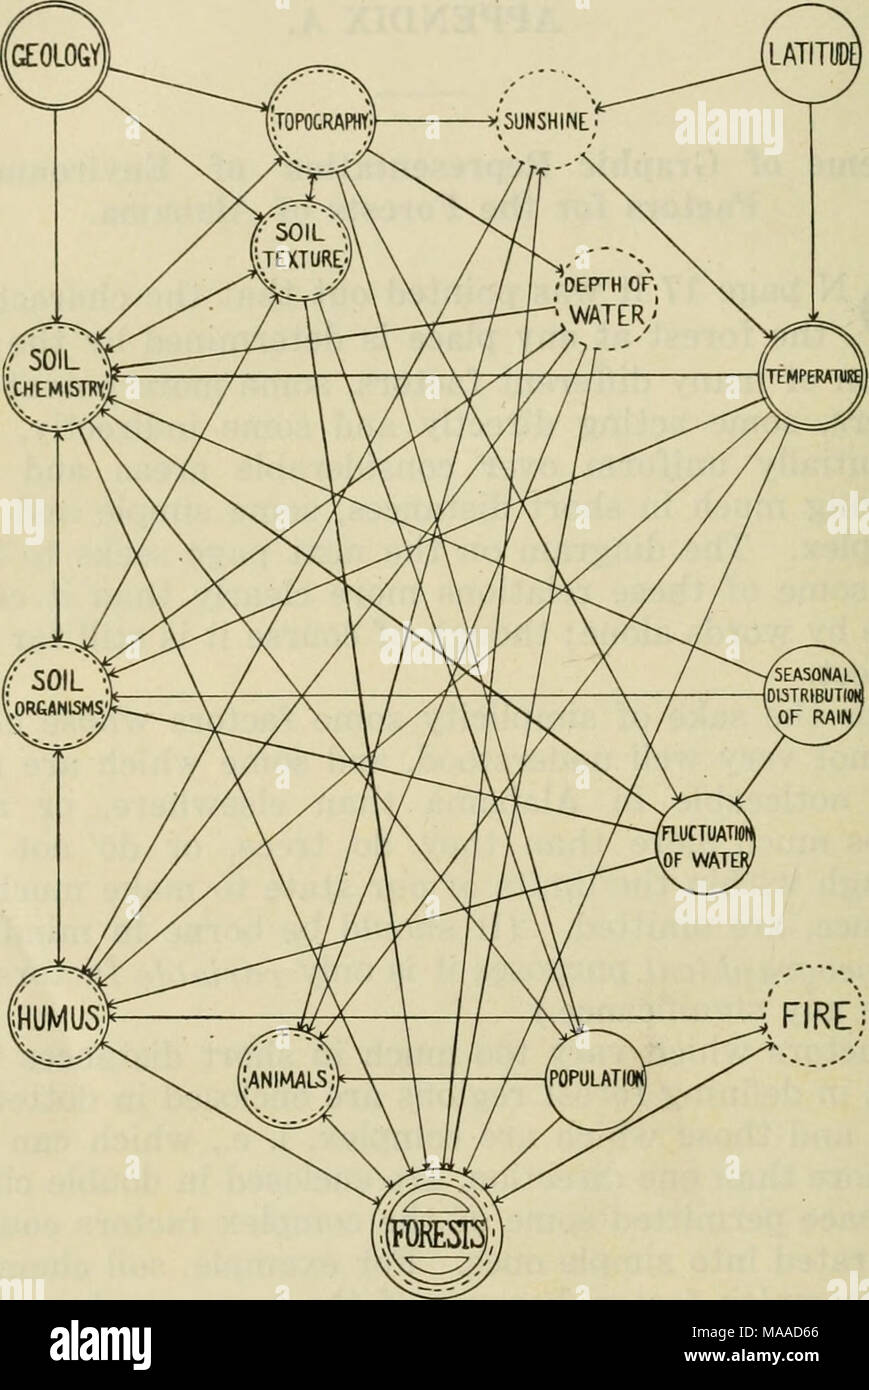 . Economic botany of Alabama . R.M.H 1313 Diagram showing relations of the most important environmental factors in Alabama to the forests and to each other. &quot;Soil organisms&quot; means all plants and animals, from bacteria and fungi to moles and salamanders, which live underground or in humus and have some influence on the soil. &quot;Animals&quot; means those which travel above ground and carry seeds or pollen, or feed on plants. &quot;Population&quot; refers primarily to density of population, a simple factor. Stock Photo